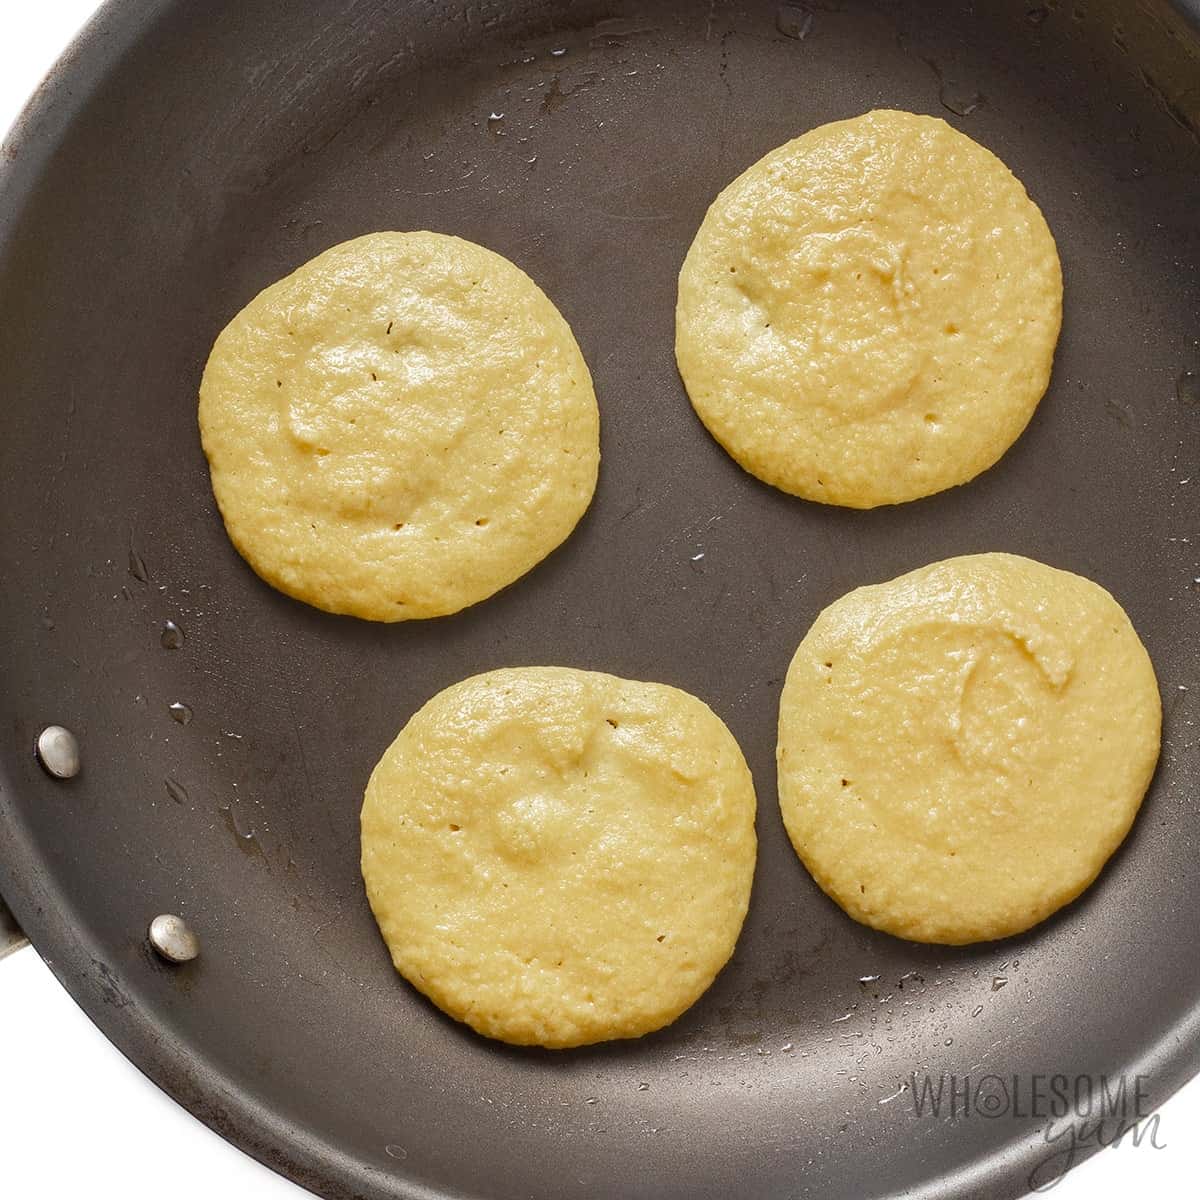 Frying keto pancakes - shown with bubbles on the edges.